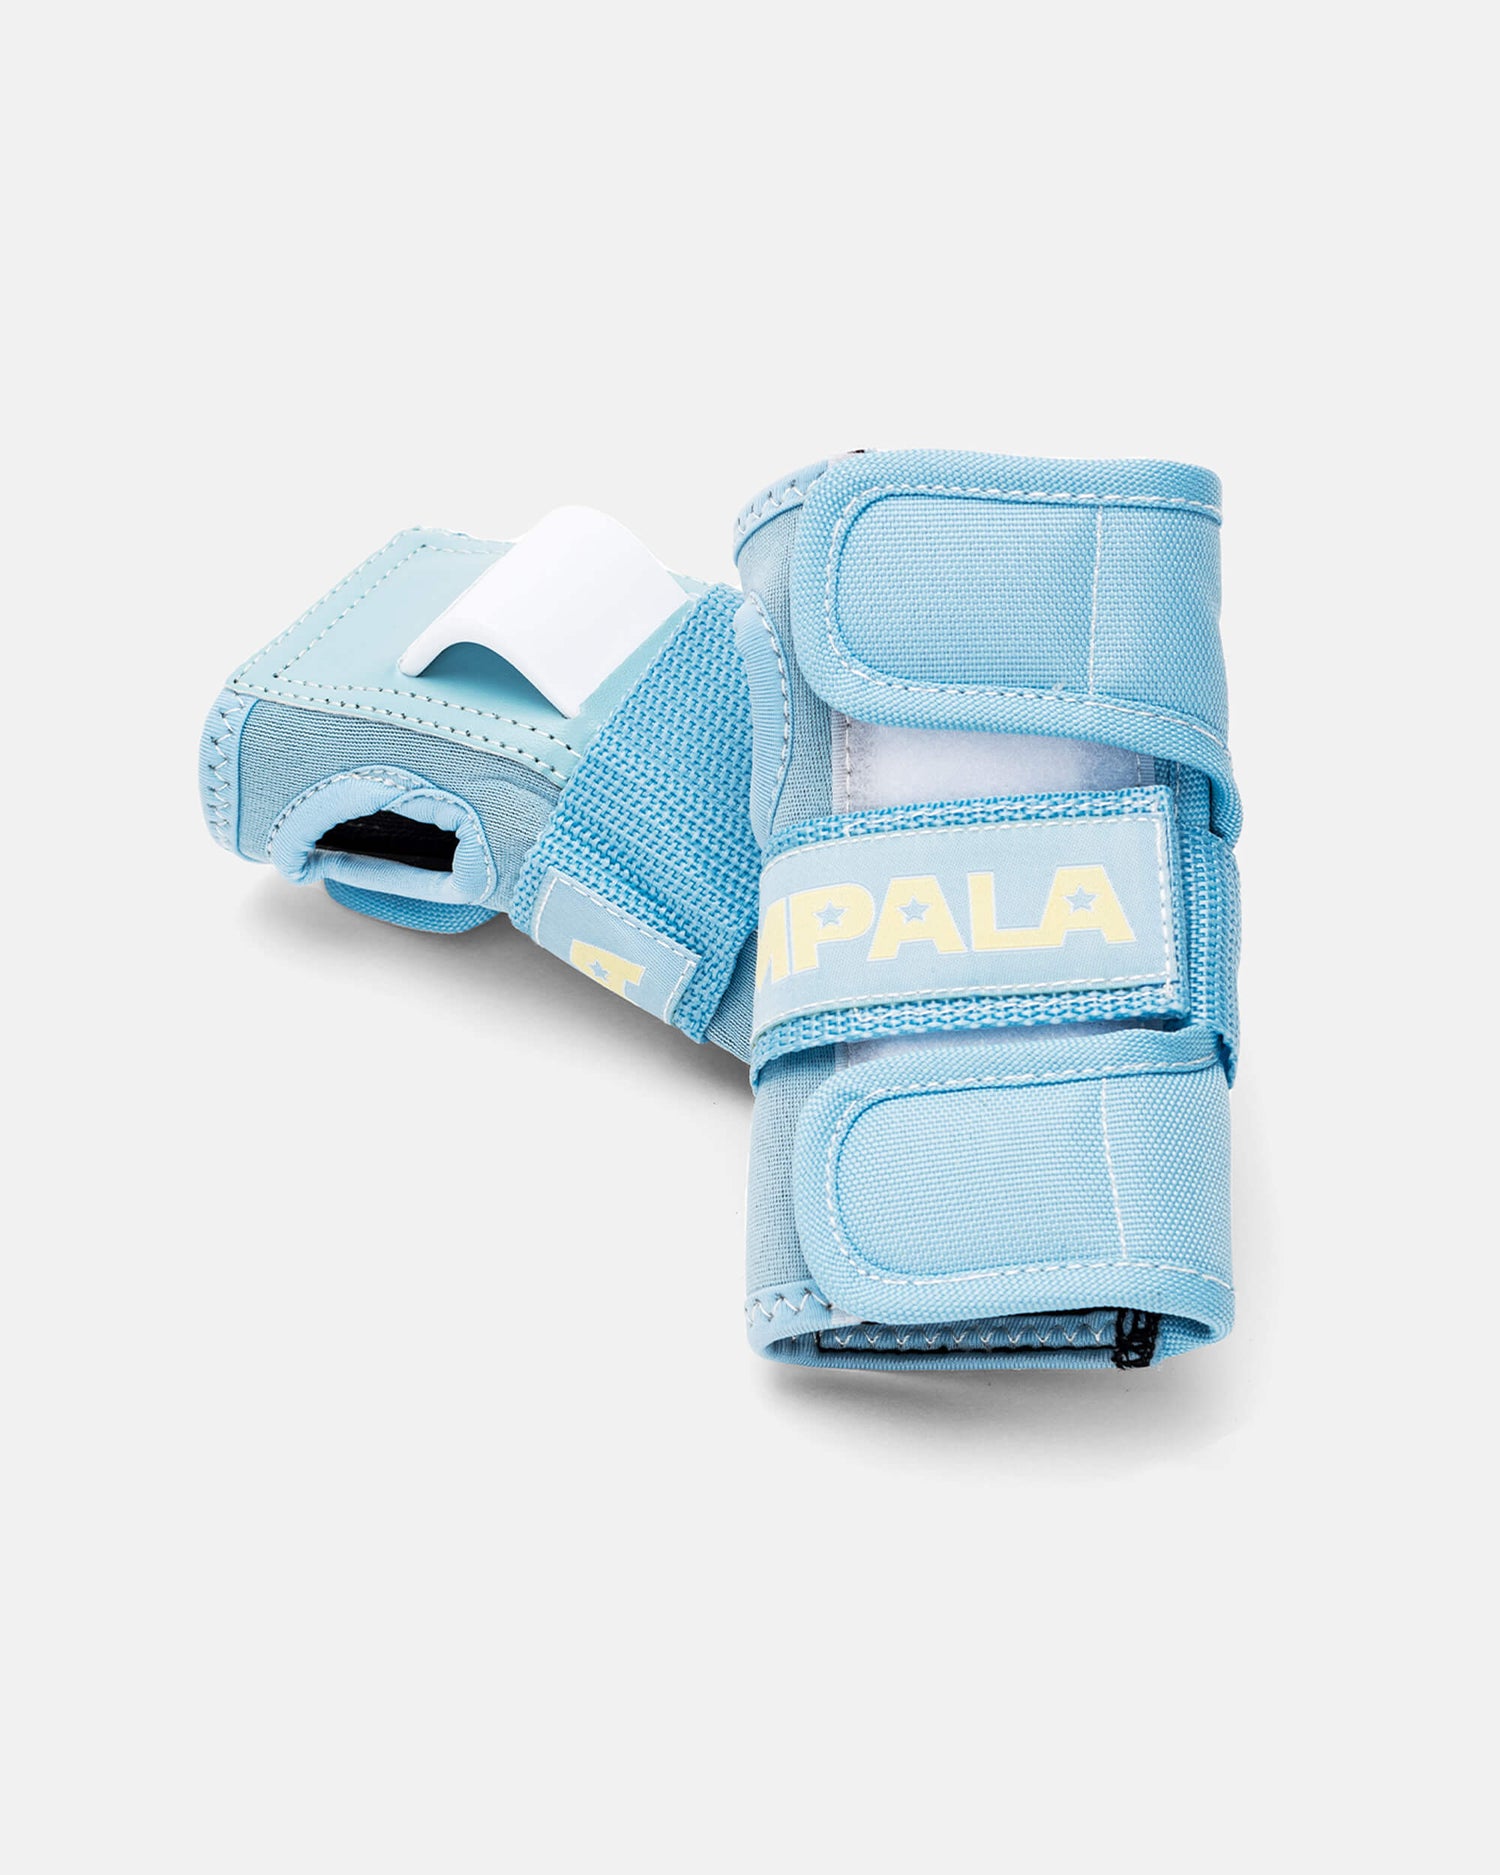 Impala Protective Gear Kids Protective Pack - Sky Blue / Yellow in Sky Blue/Yellow